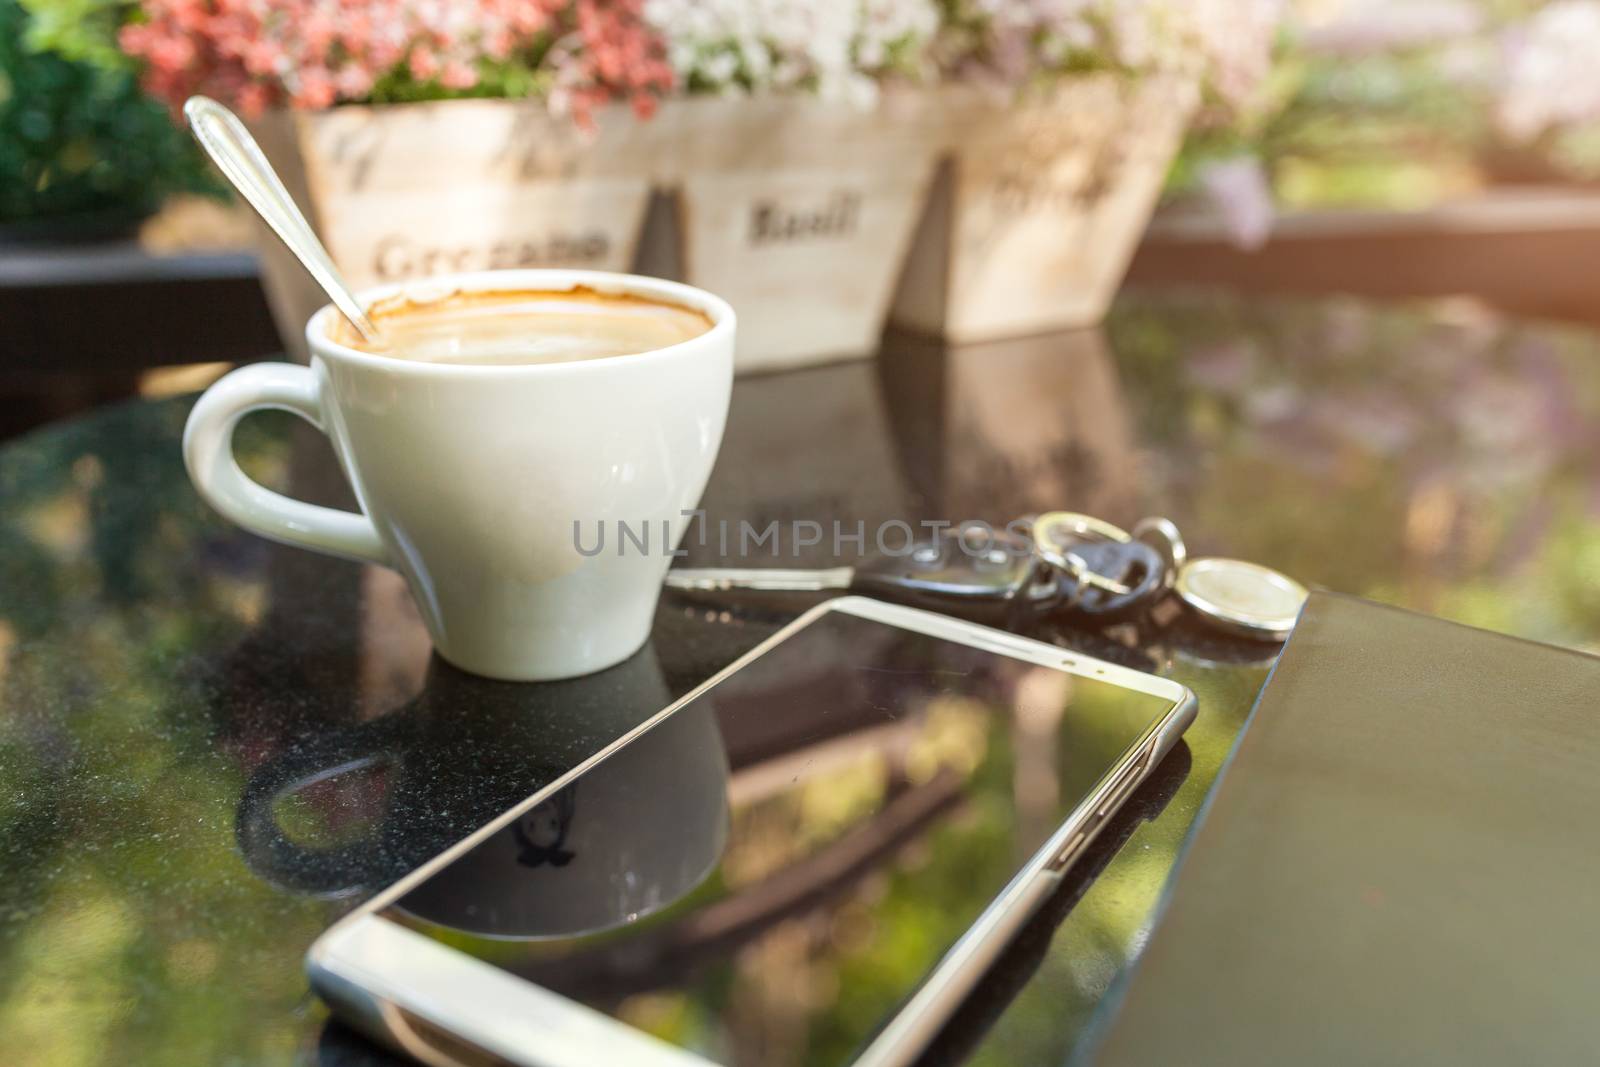 Digital smartphone and cup of coffee on desk with vintage flower. Simple coffee break in morning / selective focus